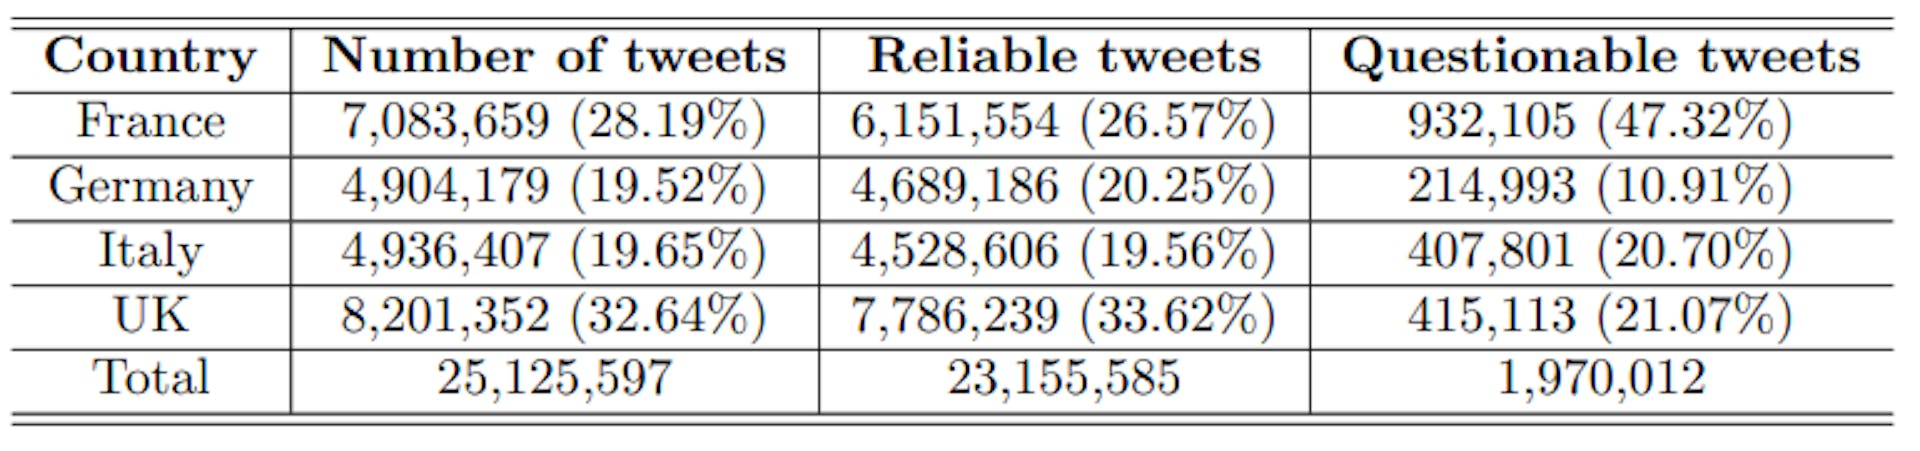 Table 2: Volume of tweets by country and reliability